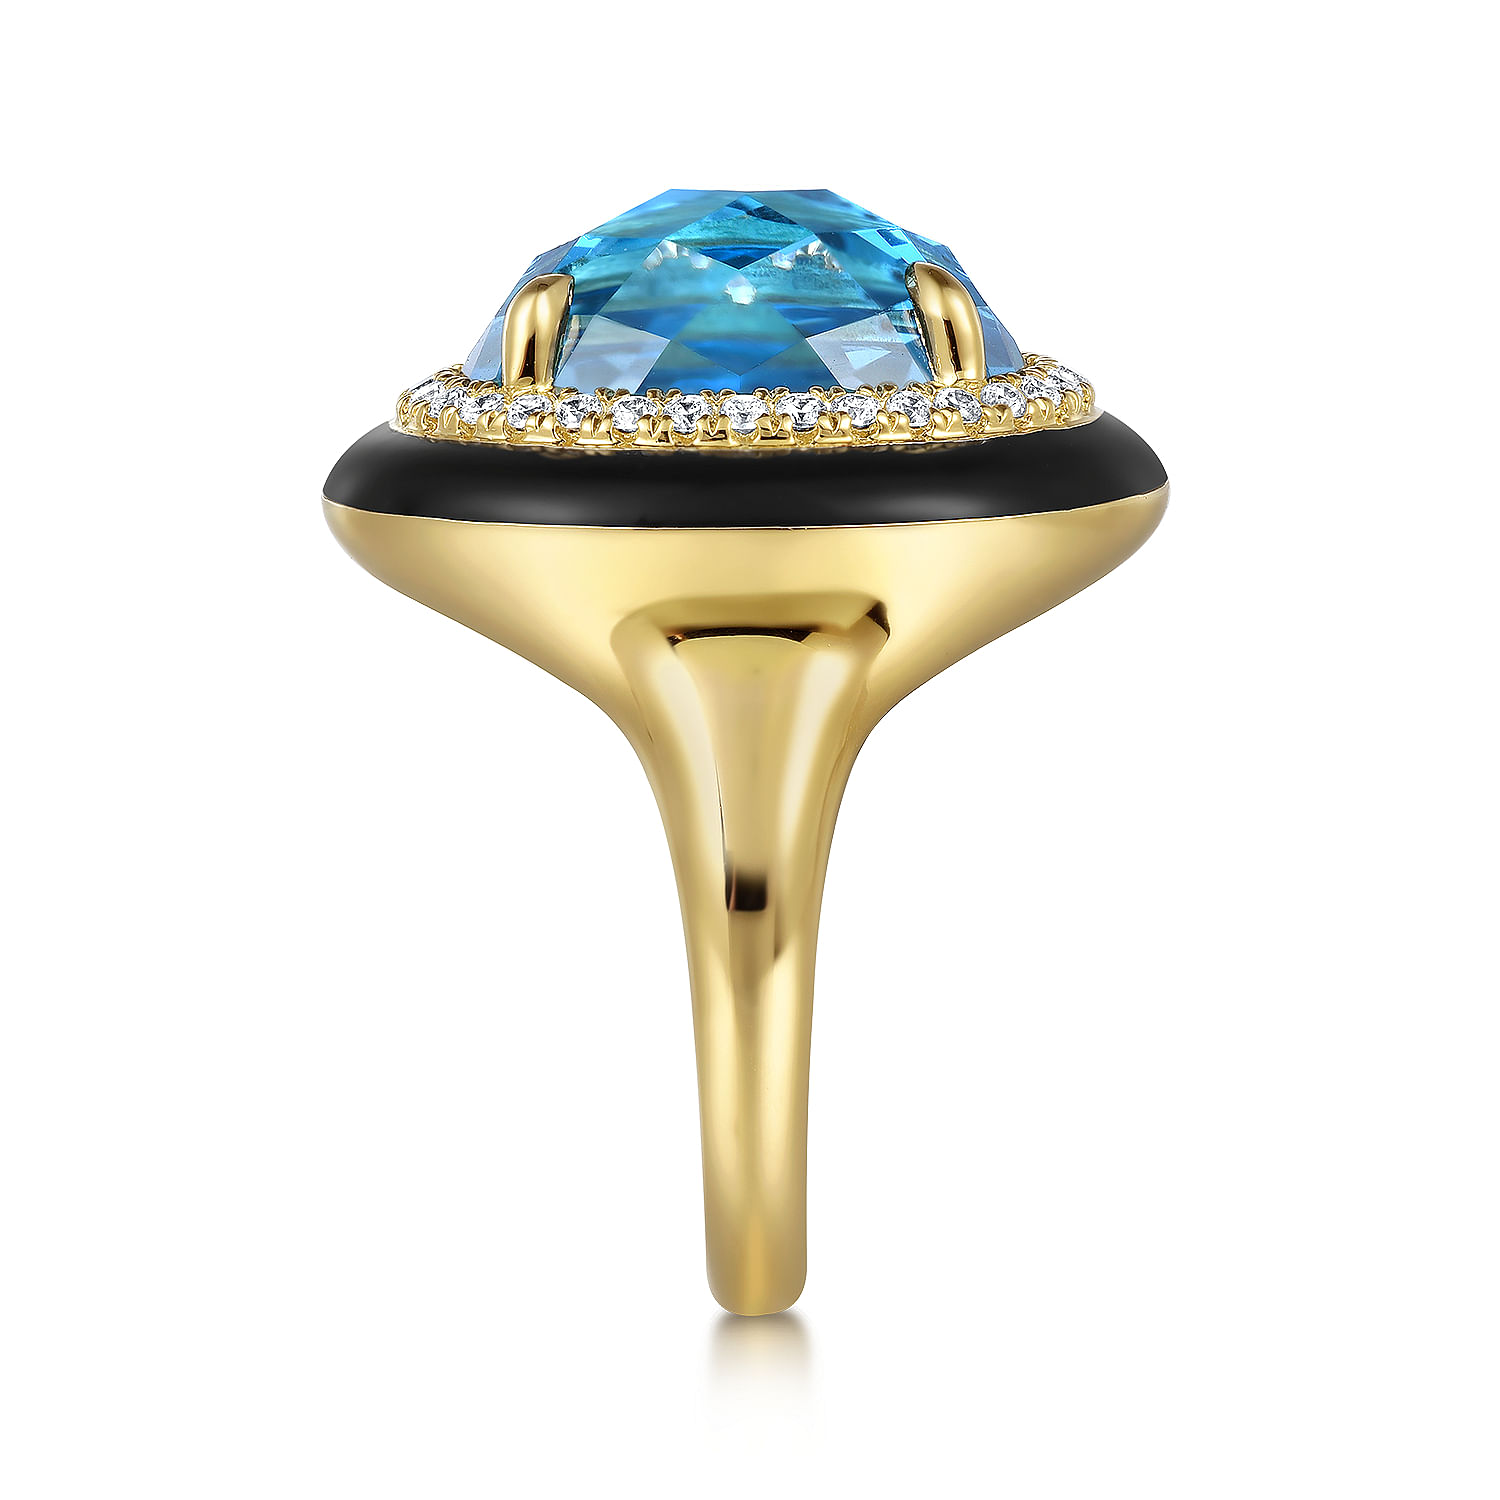 14K Yellow Gold Diamond and Oval Shape Blue Topaz Ladies Ring With Flower Pattern J-Back and Black Enamel